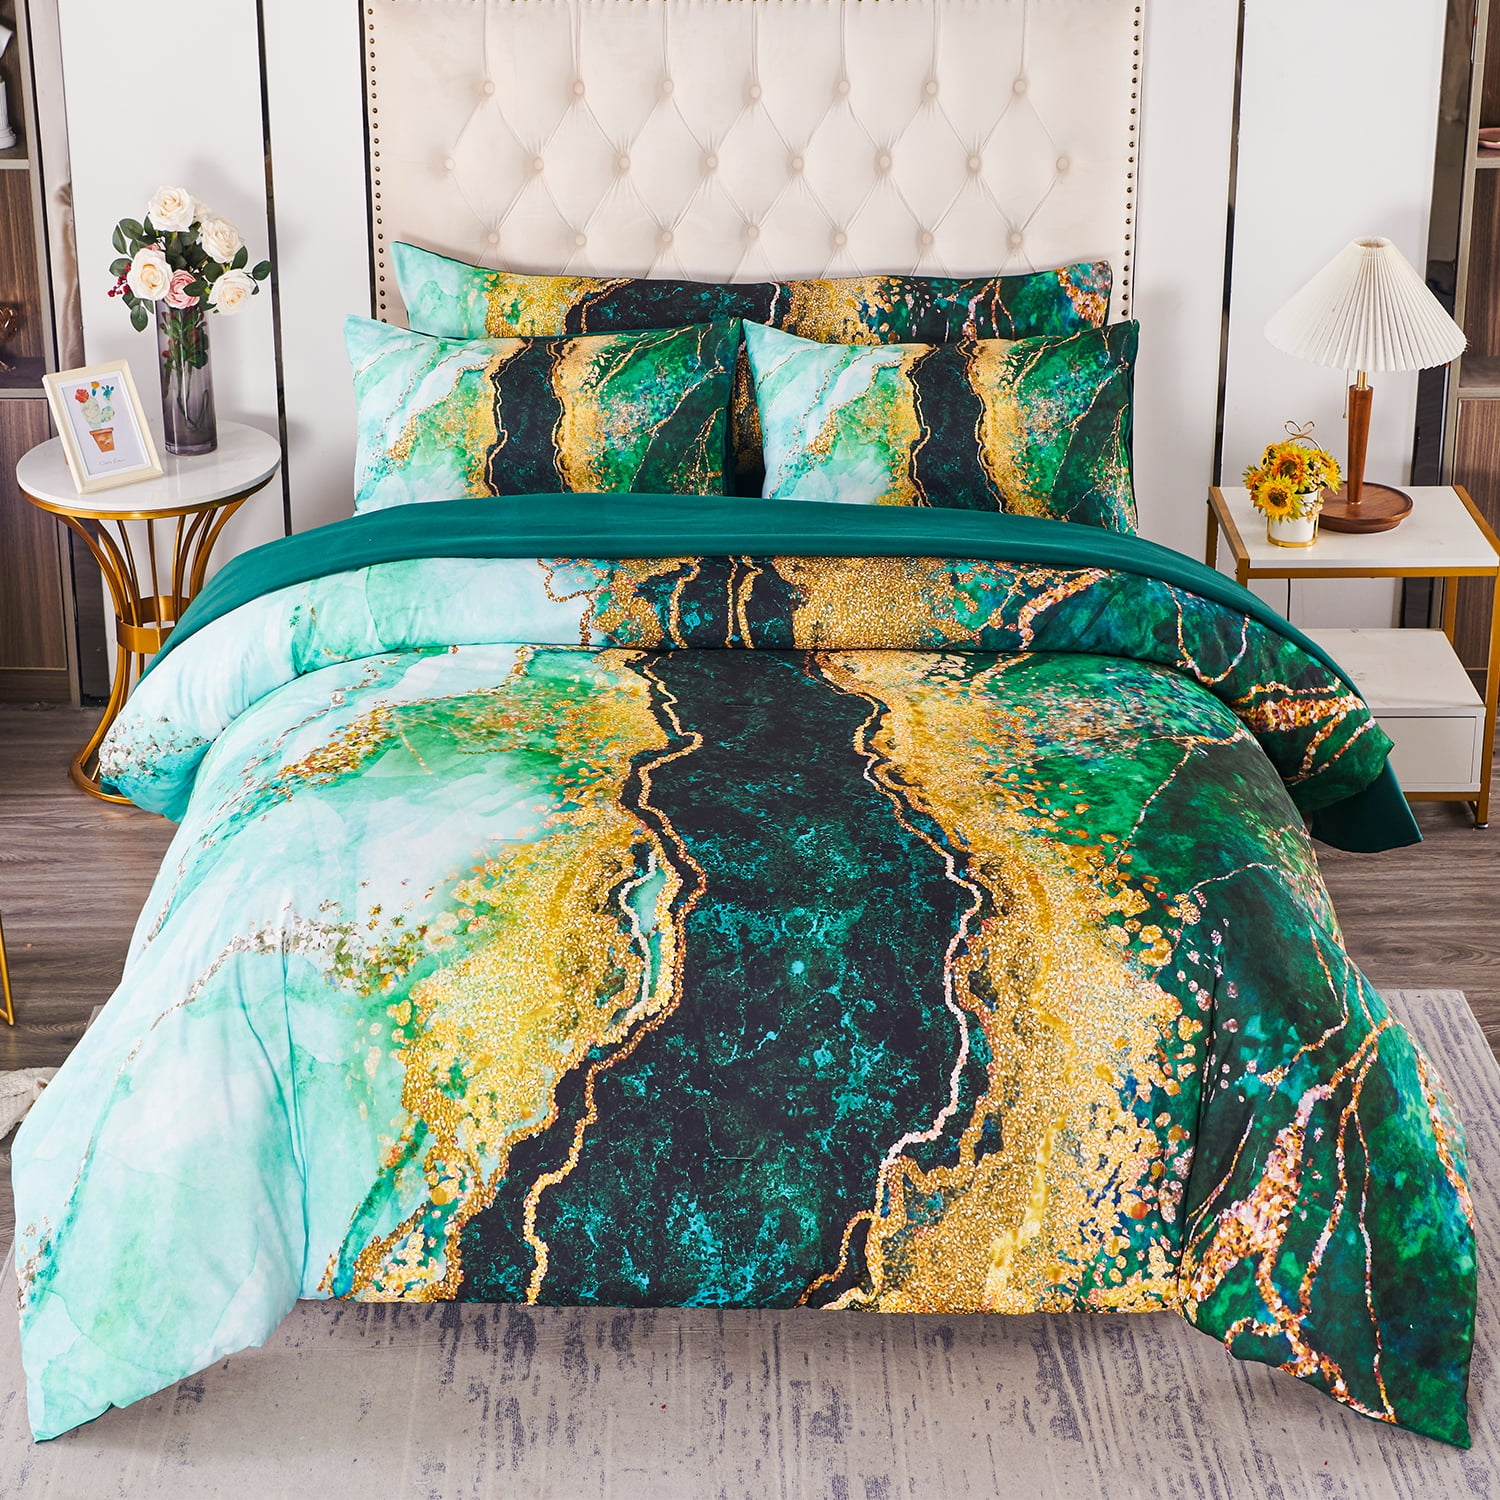 Blue,Queen PERFEMET 6 Pcs Bed-in-A-Bag Blue Watercolor Marble Queen Size Comforter Set with Matched Bed Sheets,Colorful Retro Artwork Style Bed Collections,Soft and Durable Bedding Set 